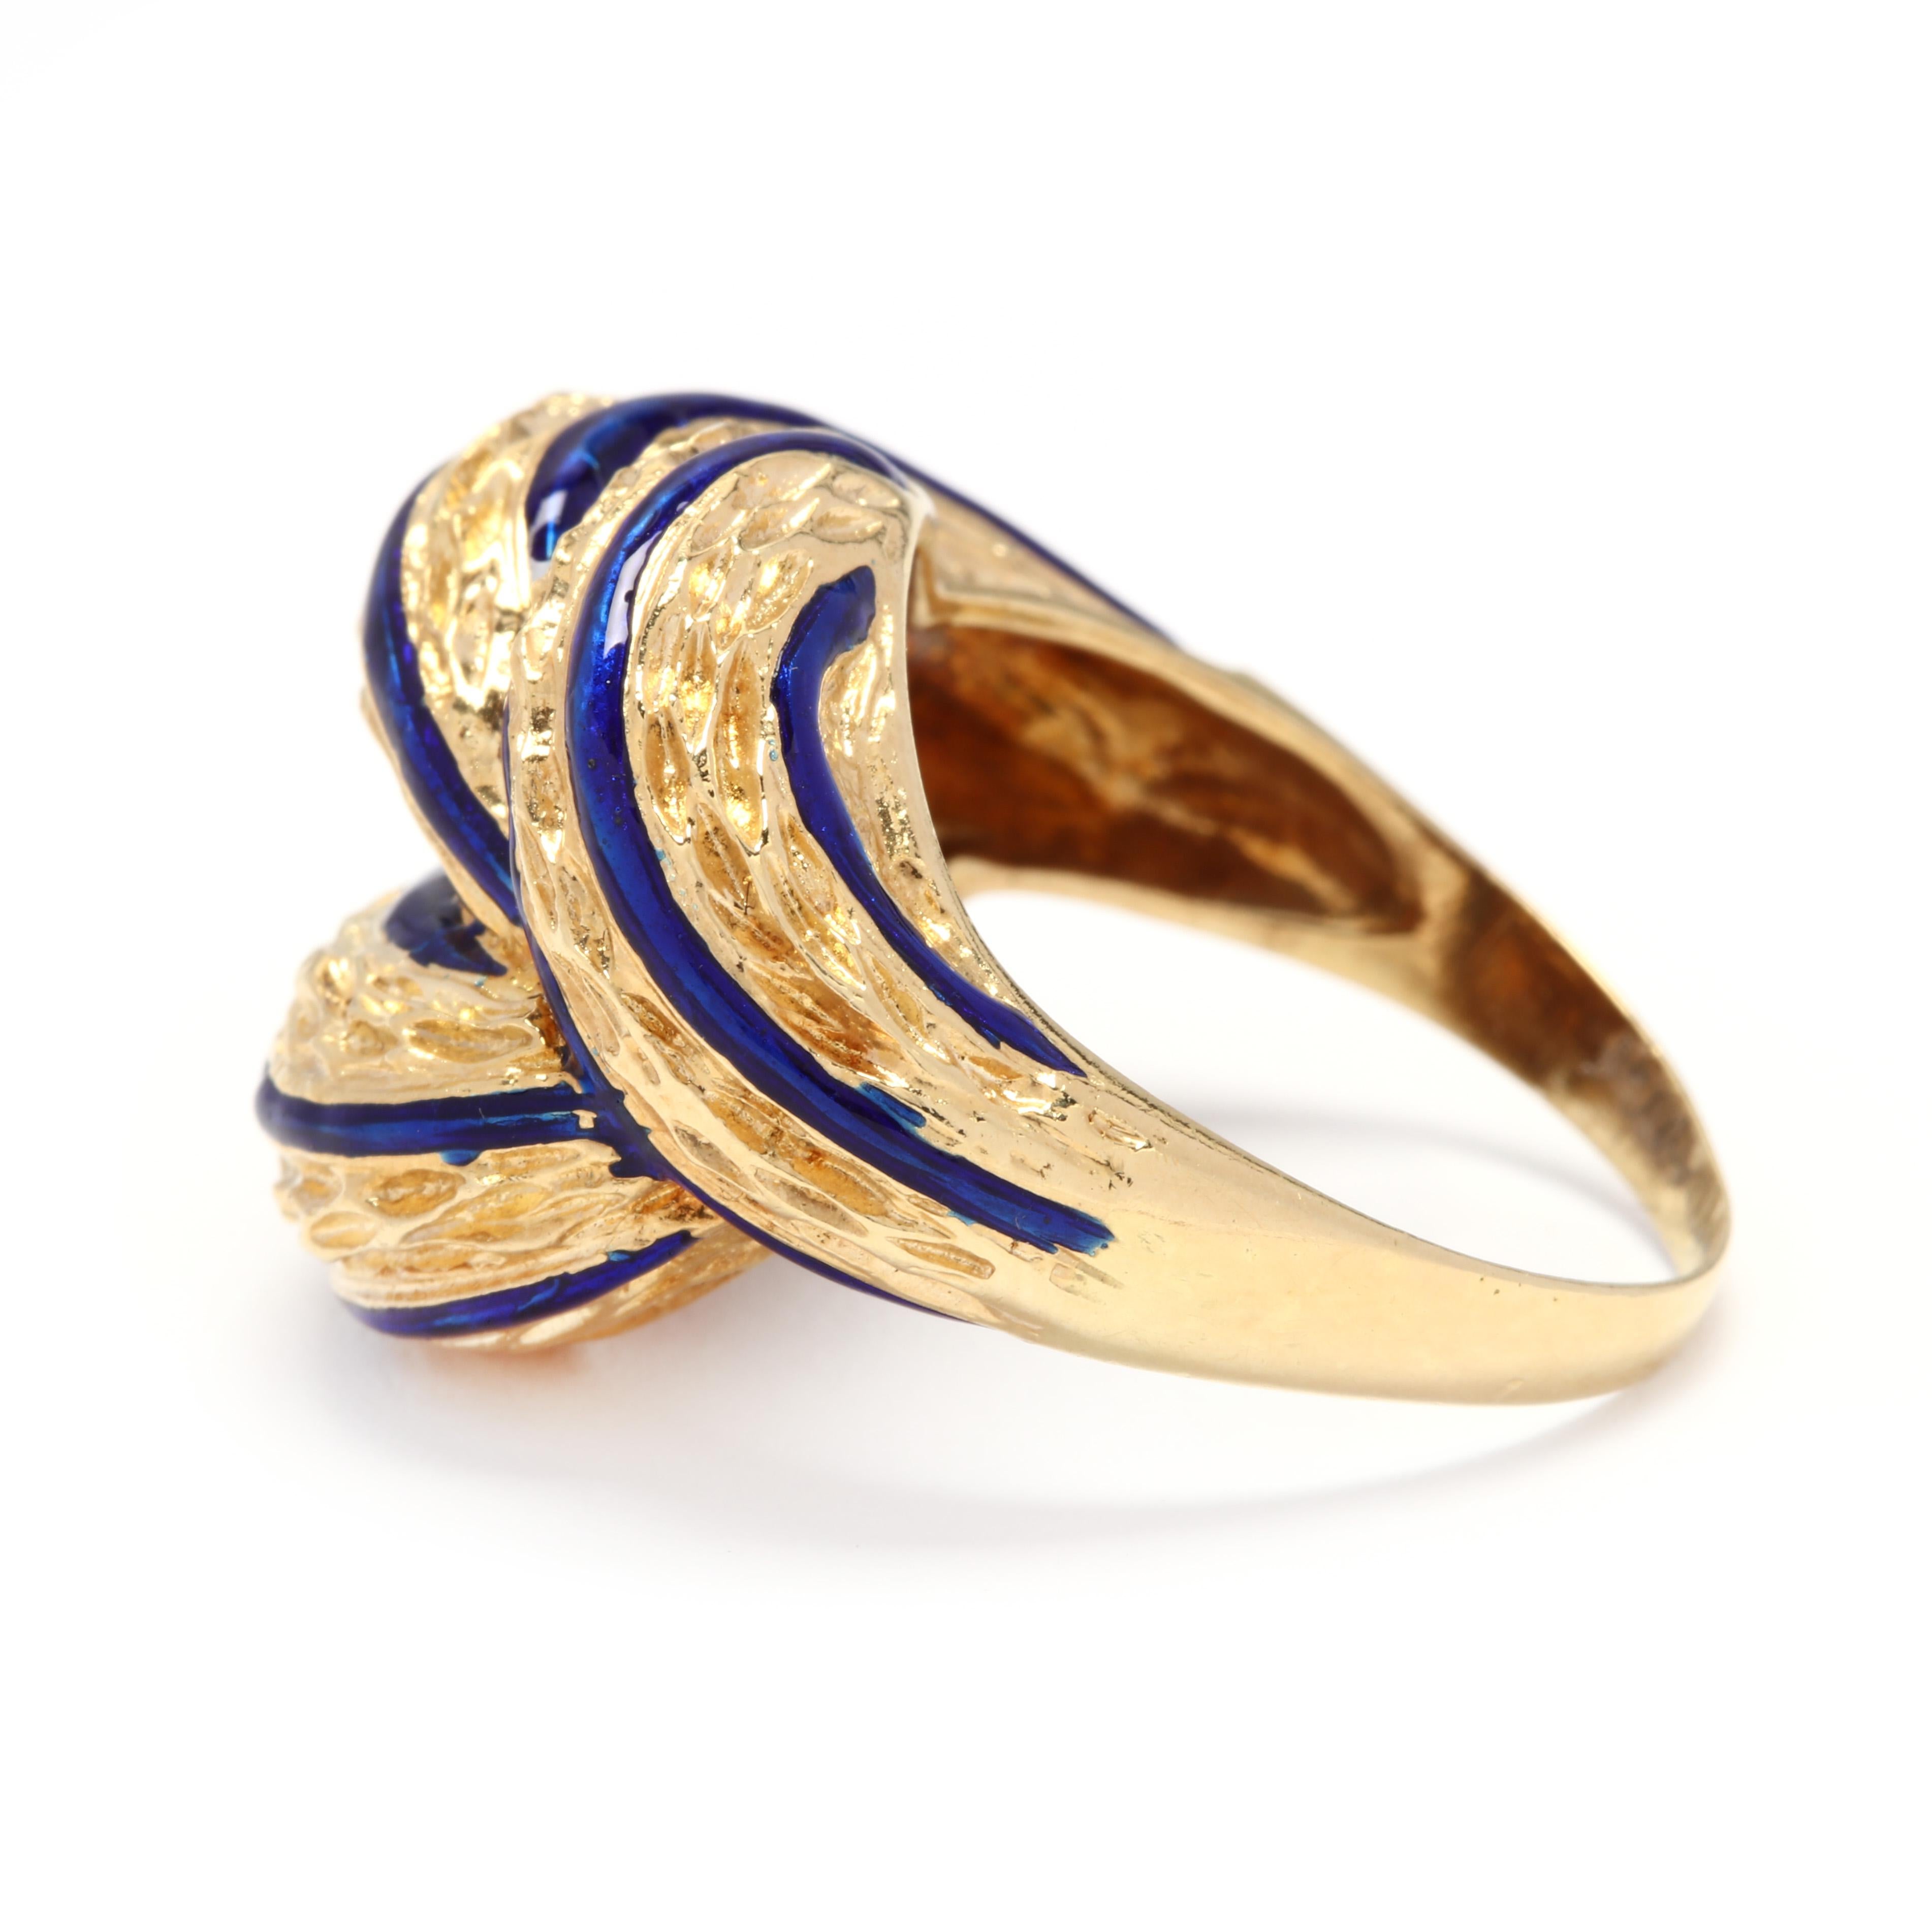 Women's or Men's Vintage 18 Karat Yellow Gold and Blue Enamel Dome Knot Ring